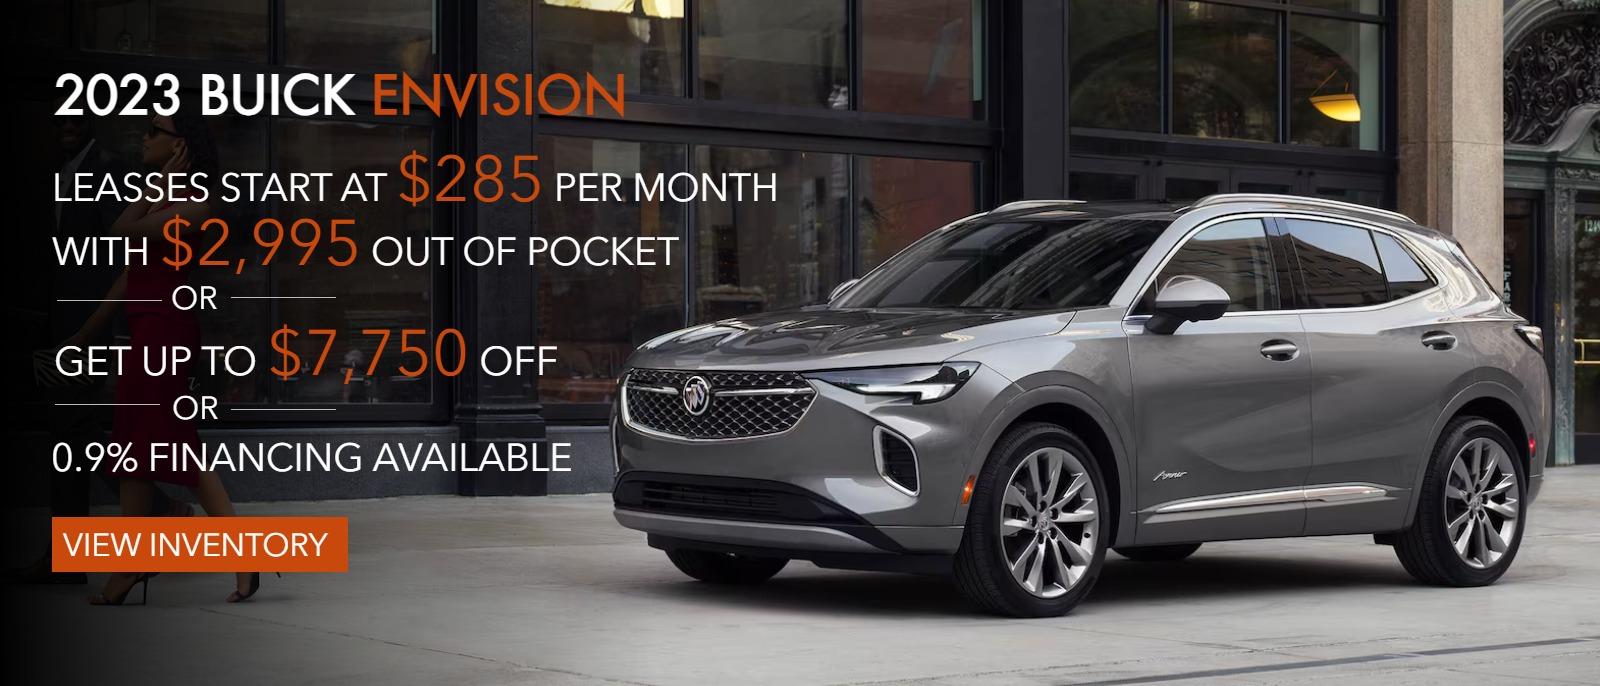 2023 BUICK ENVISION
LEASSES START AT $285 PER MONTH WITH $2995 OUT OF POCKET 
GET UP TO $7750 OFF 
0.9% FINANCING AVAILABLE